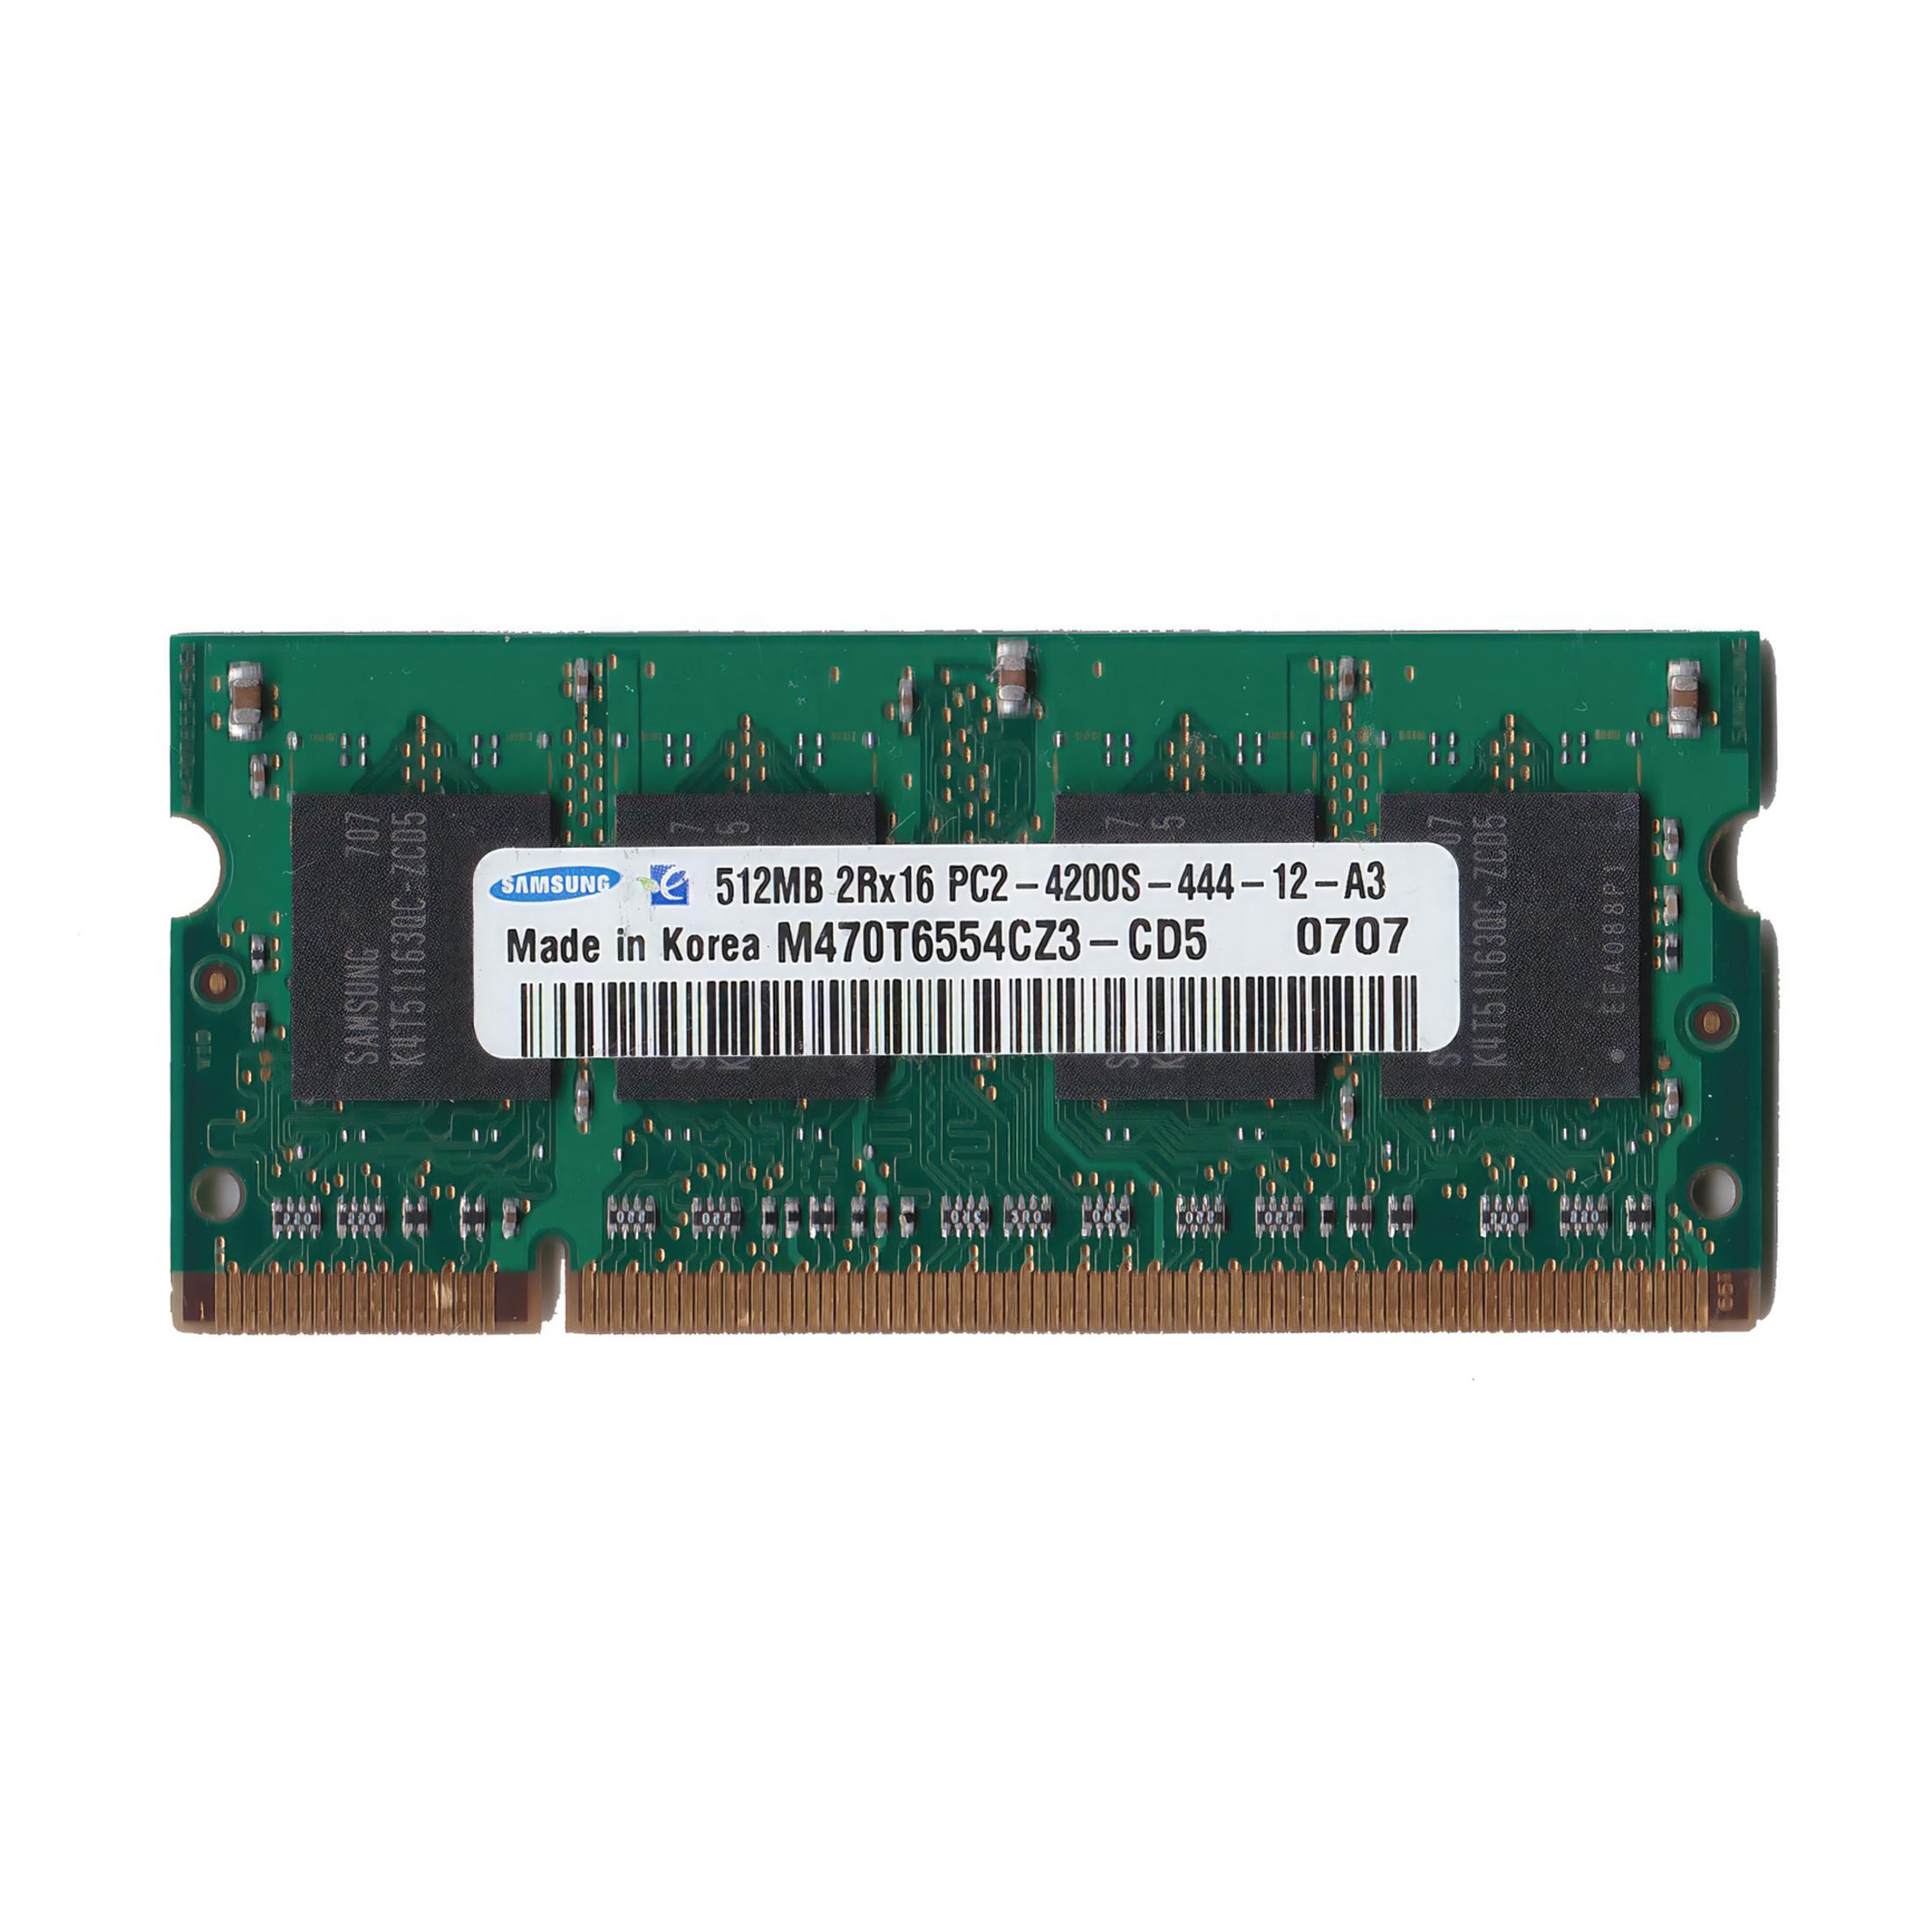 Preowned SAMSUNG 512MB 2RX16 PC2-4200S-444-12-A3 Laptop Memory Module (Untested) - Priced to Clear